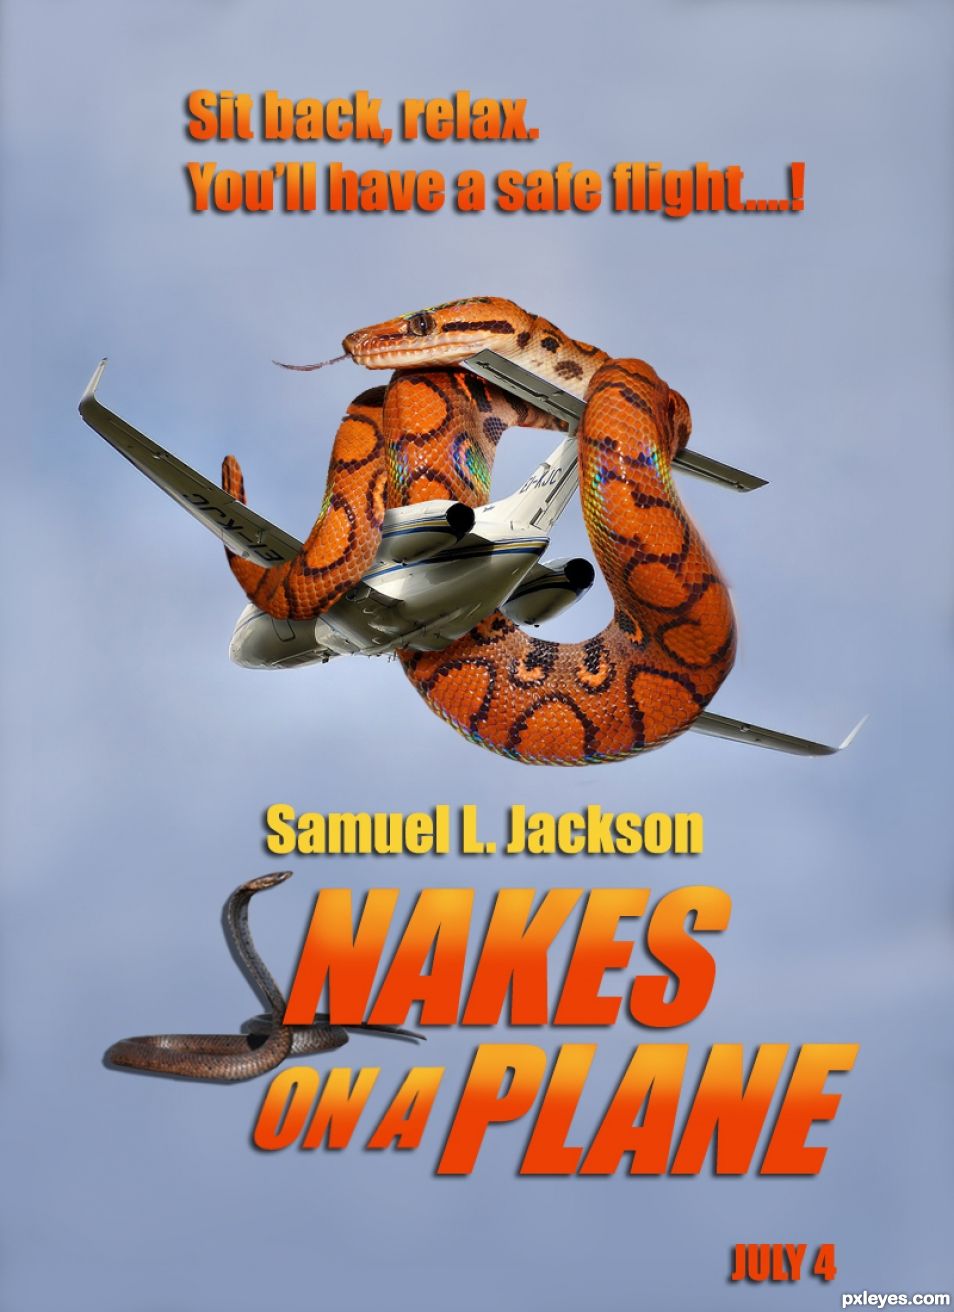 Snakes On A Plane